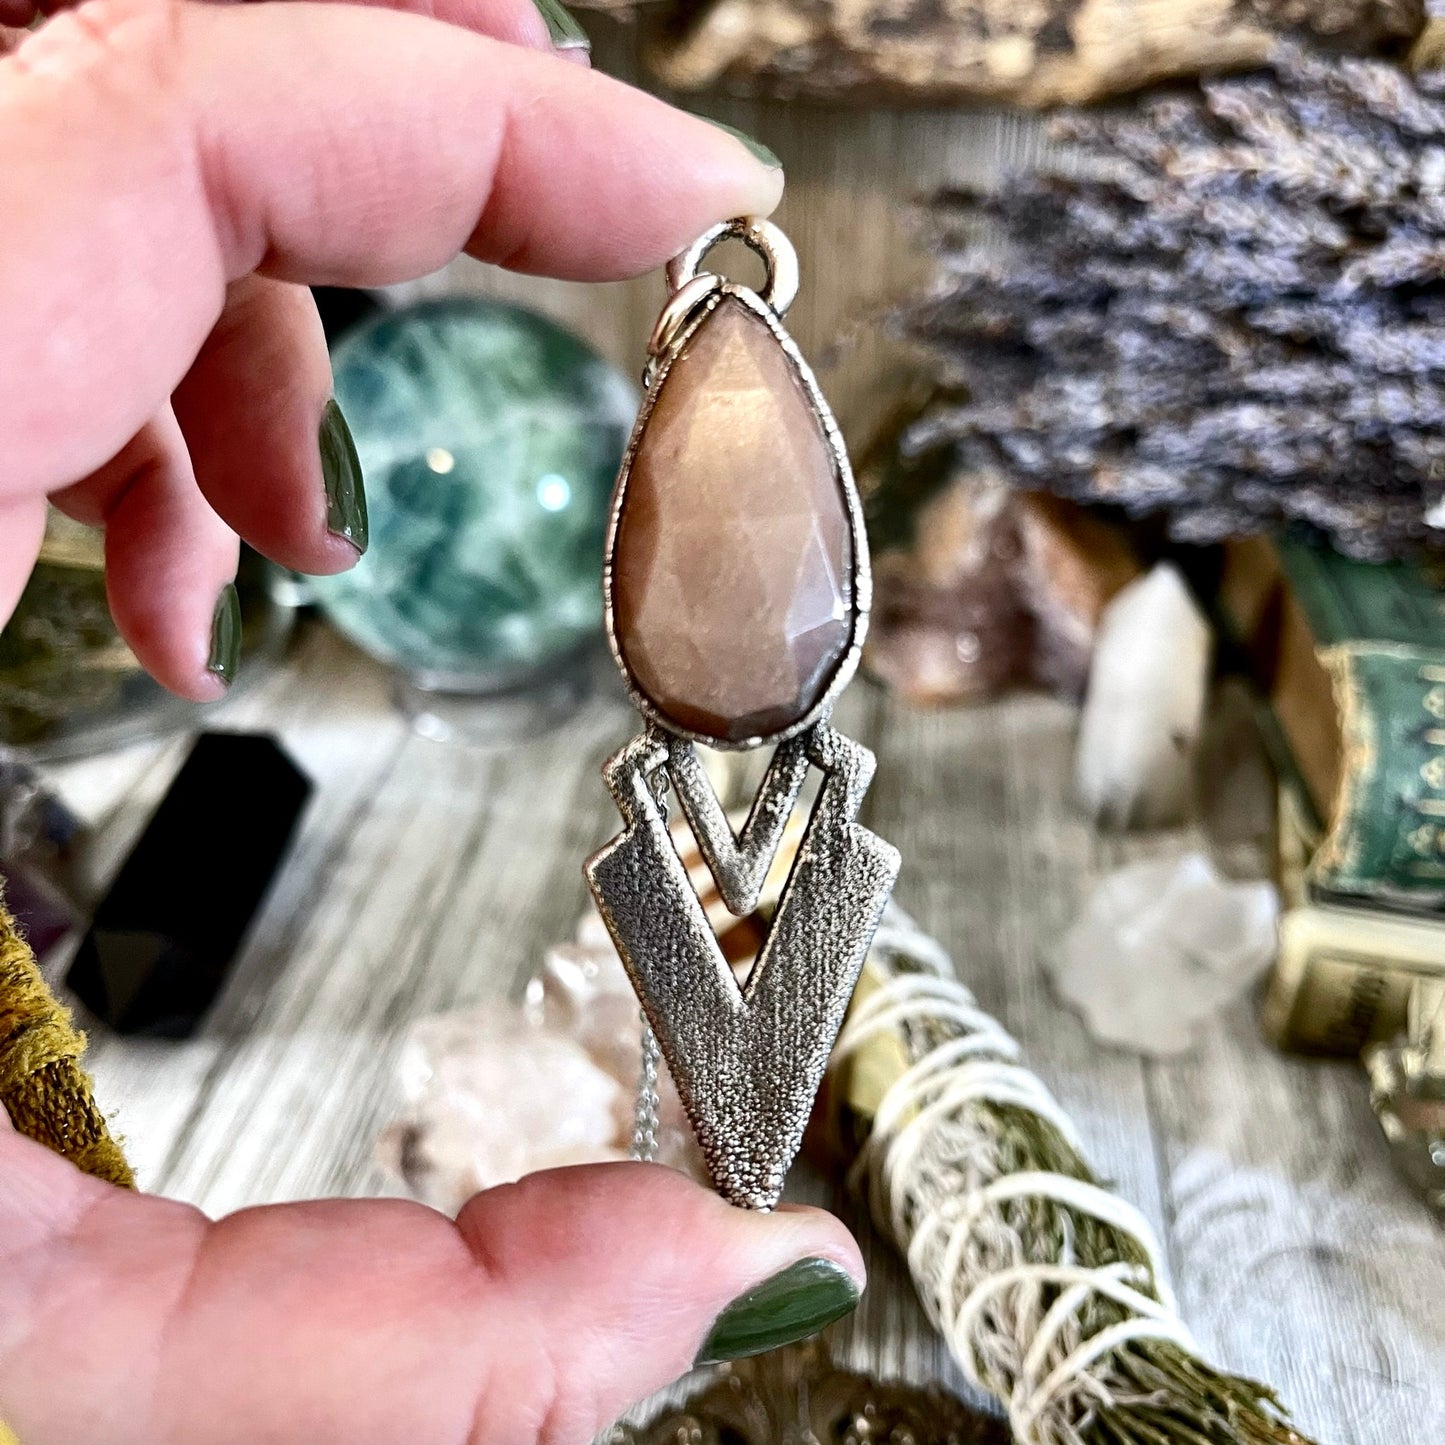 Big Crystal Necklace, Big Stone Necklace, Bohemian Jewelry, Crystal Necklaces, Etsy ID: 1620635164, Foxlark Alchemy, FOXLARK- NECKLACES, Jewelry, Large Crystal, Large Raw Crystal, layering necklace, Necklaces, peach moonstone, Raw crystal jewelry, raw cry